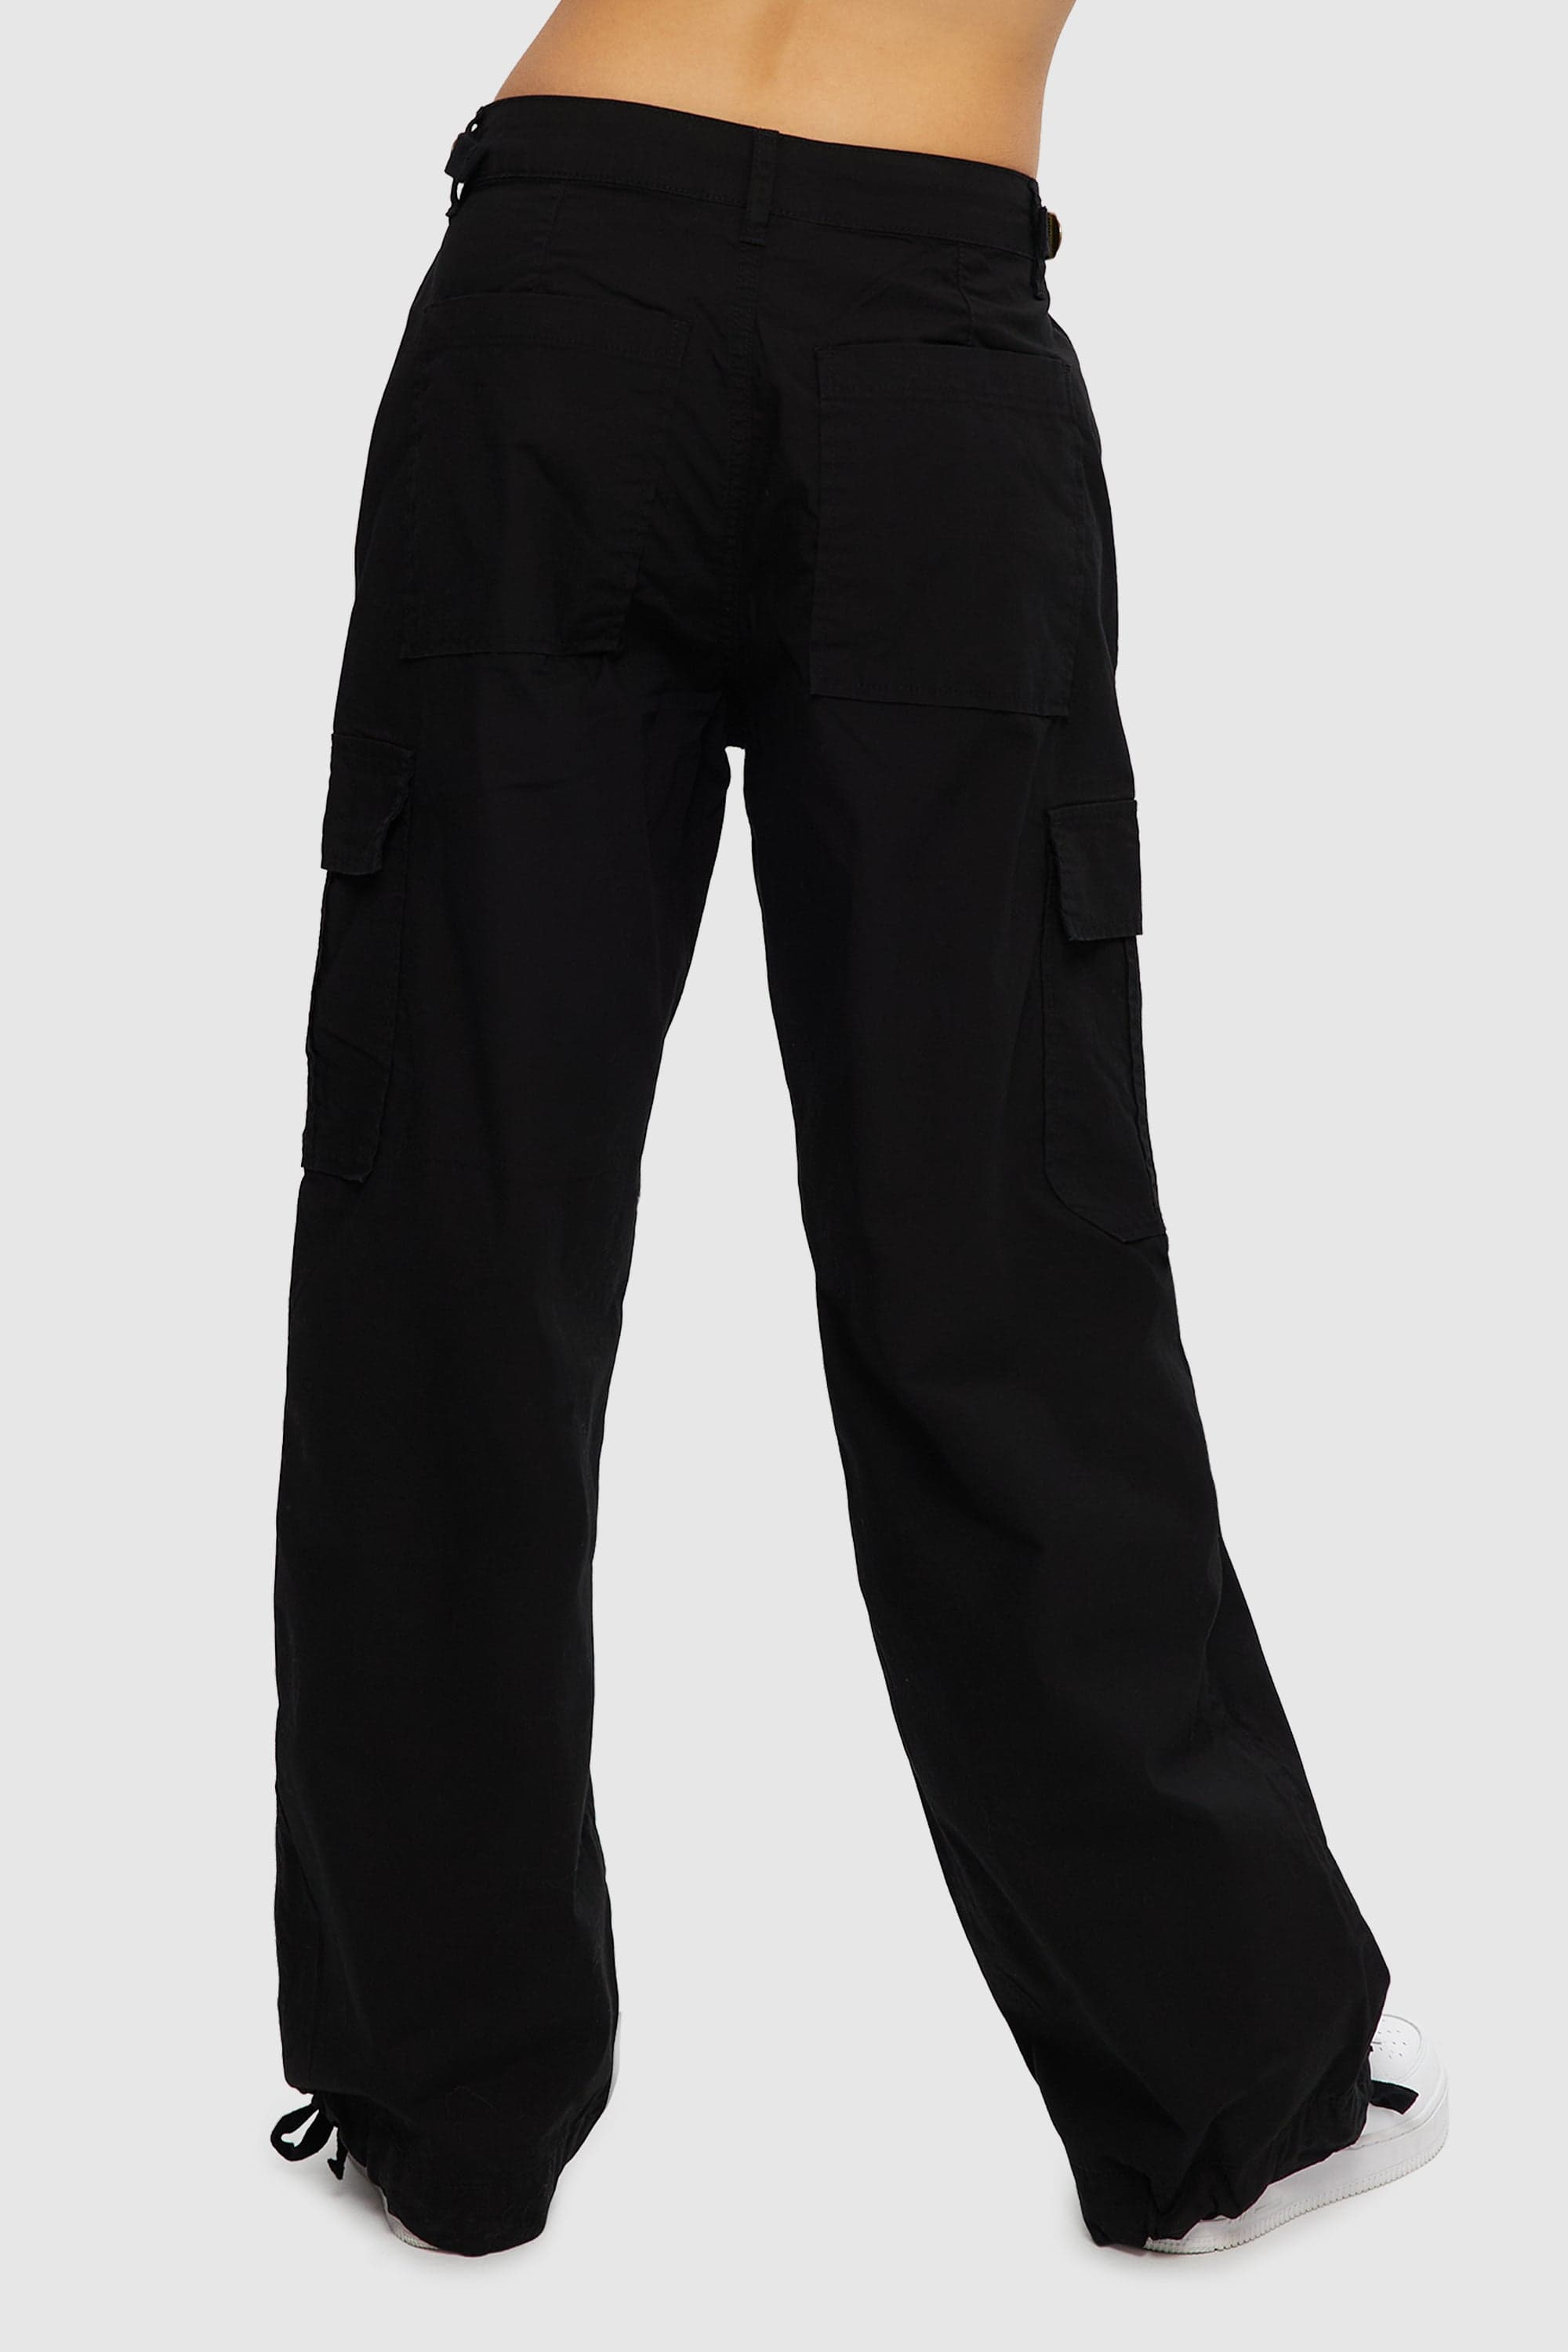 Buy Hikgo Womens Relaxed Fit Cargo Pants Bell Bottom Twill